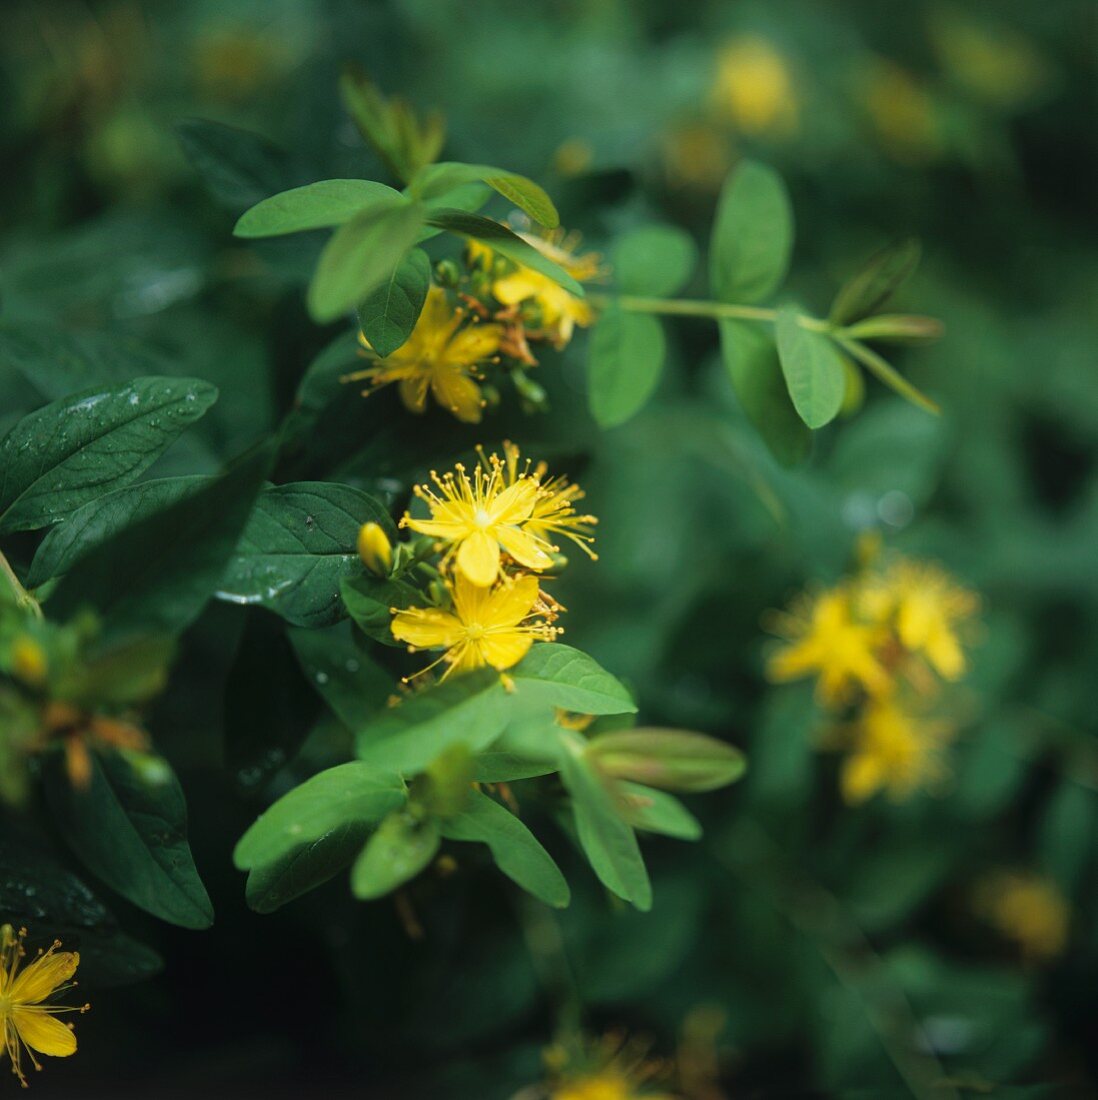 St. John's wort with yellow flowers (filling the picture)